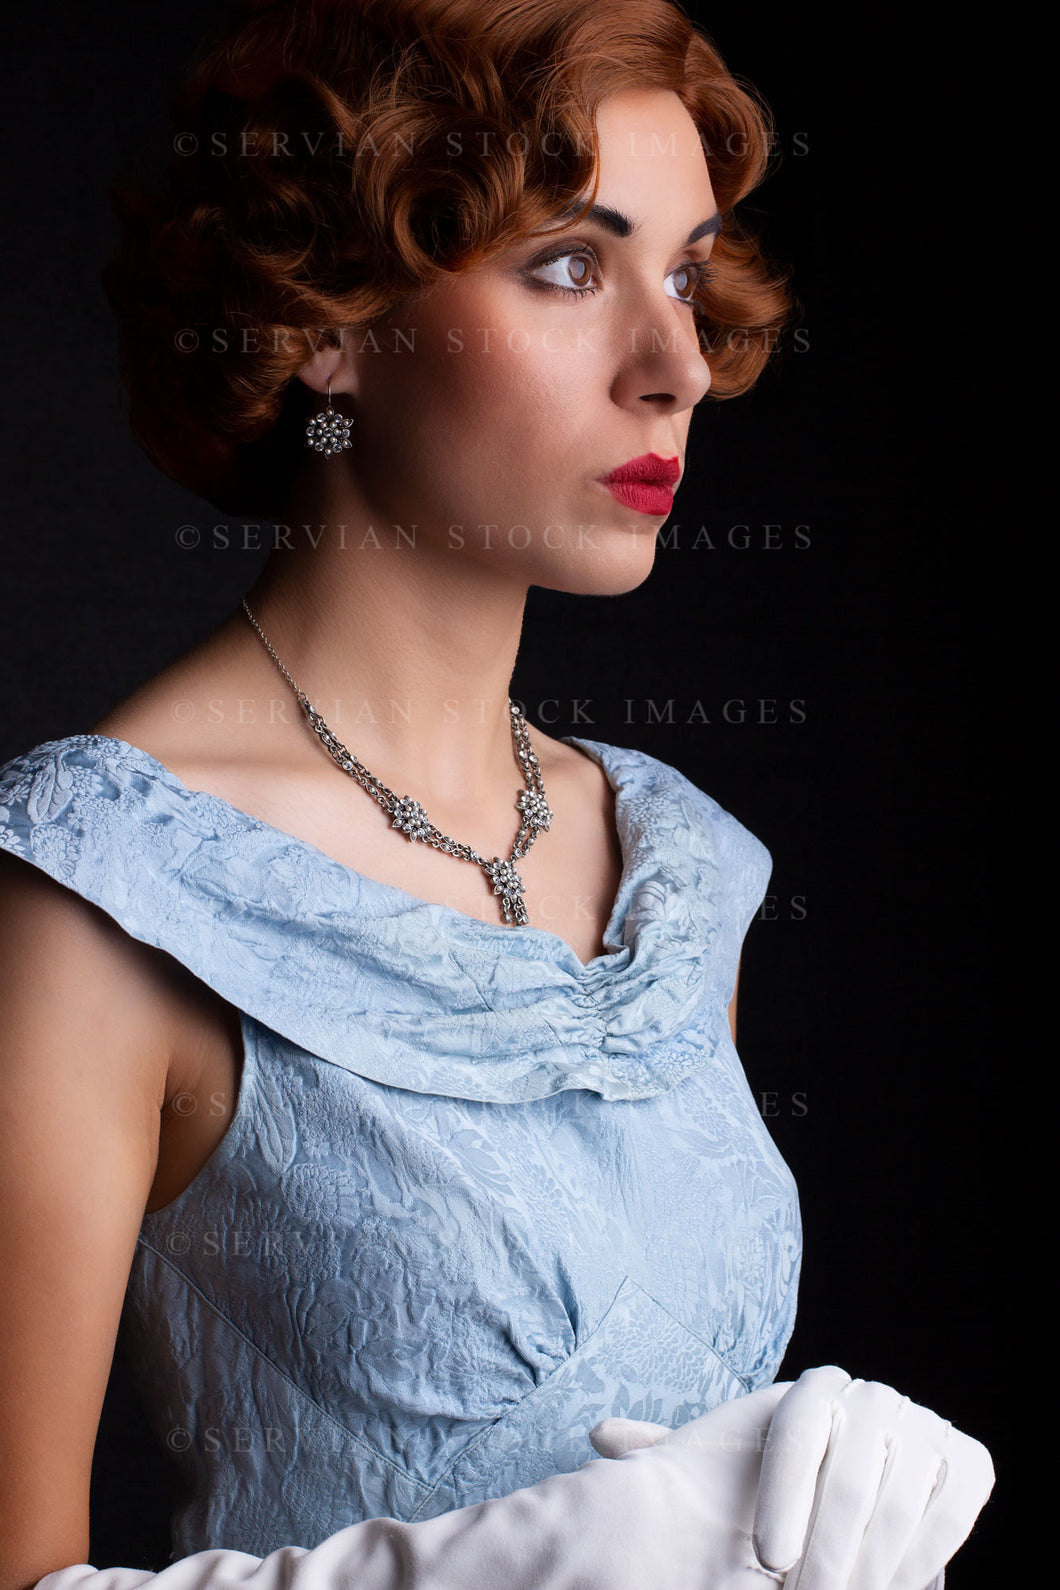 1930s woman wearing a blue vintage dress, long white gloves, and a diamante necklace against a black backdrop.(Sarah 0238)